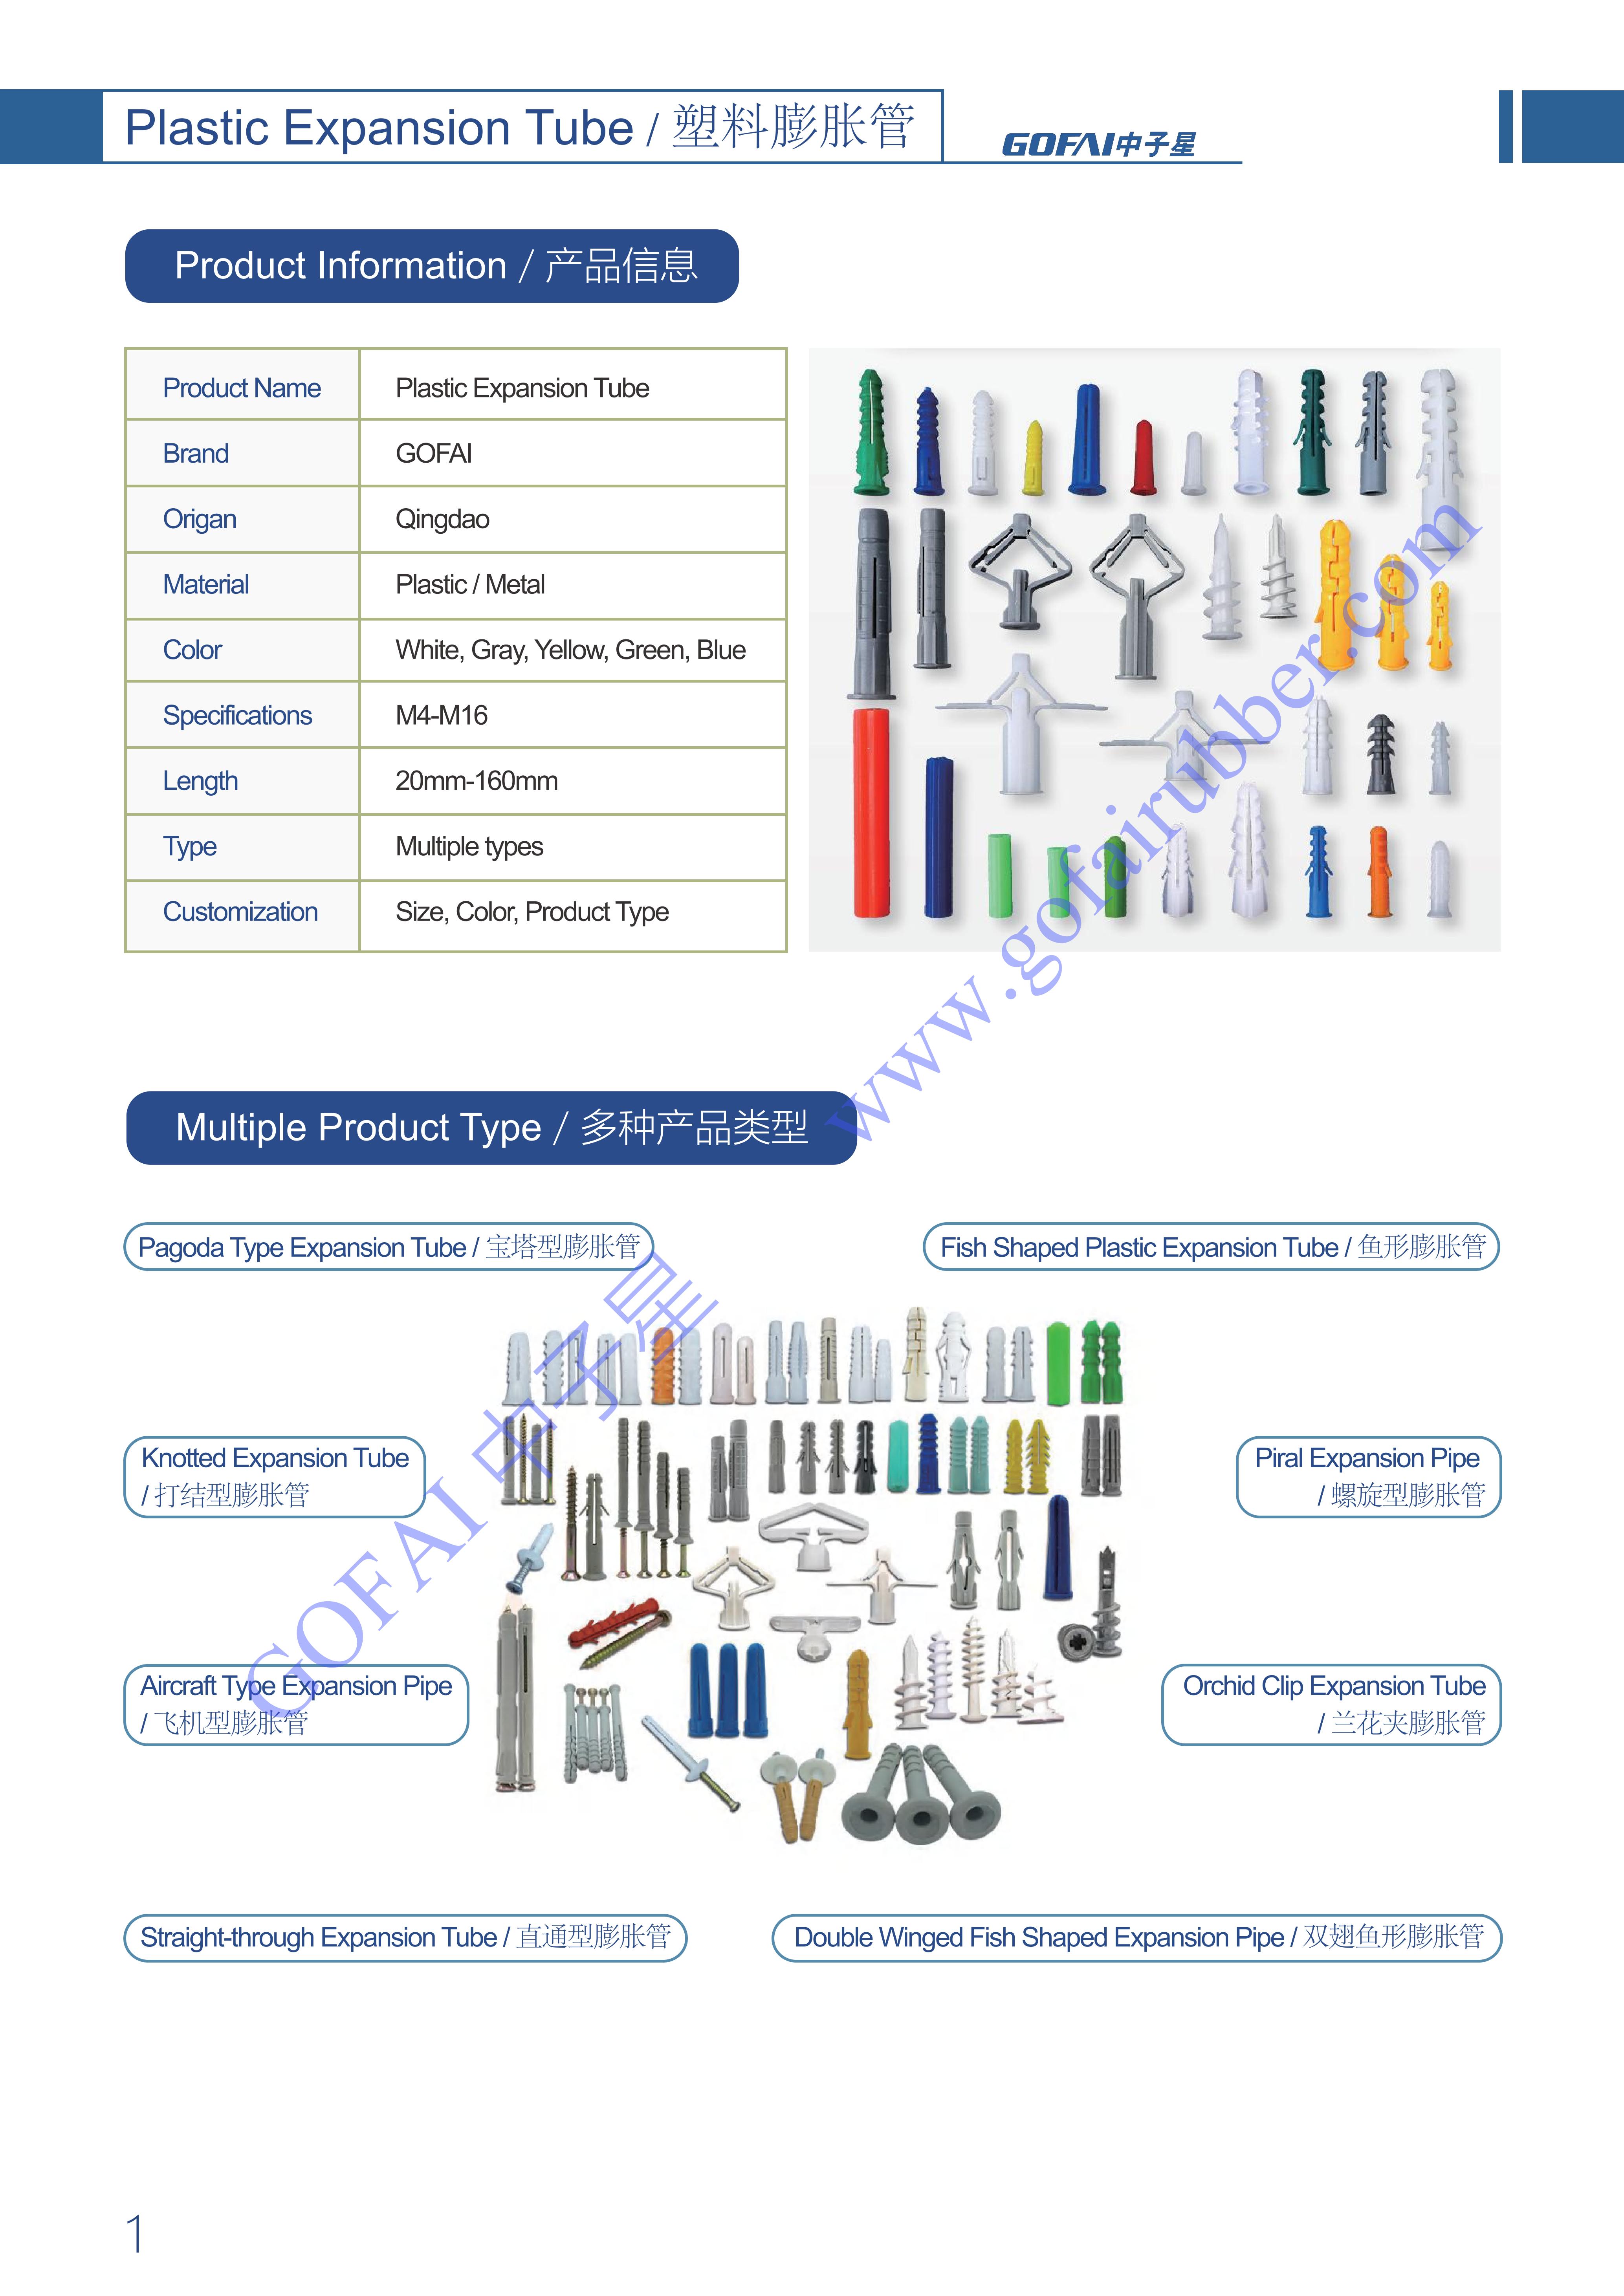 GOFAI Plastic Expansion Tube Series Products Brochure_2.jpg